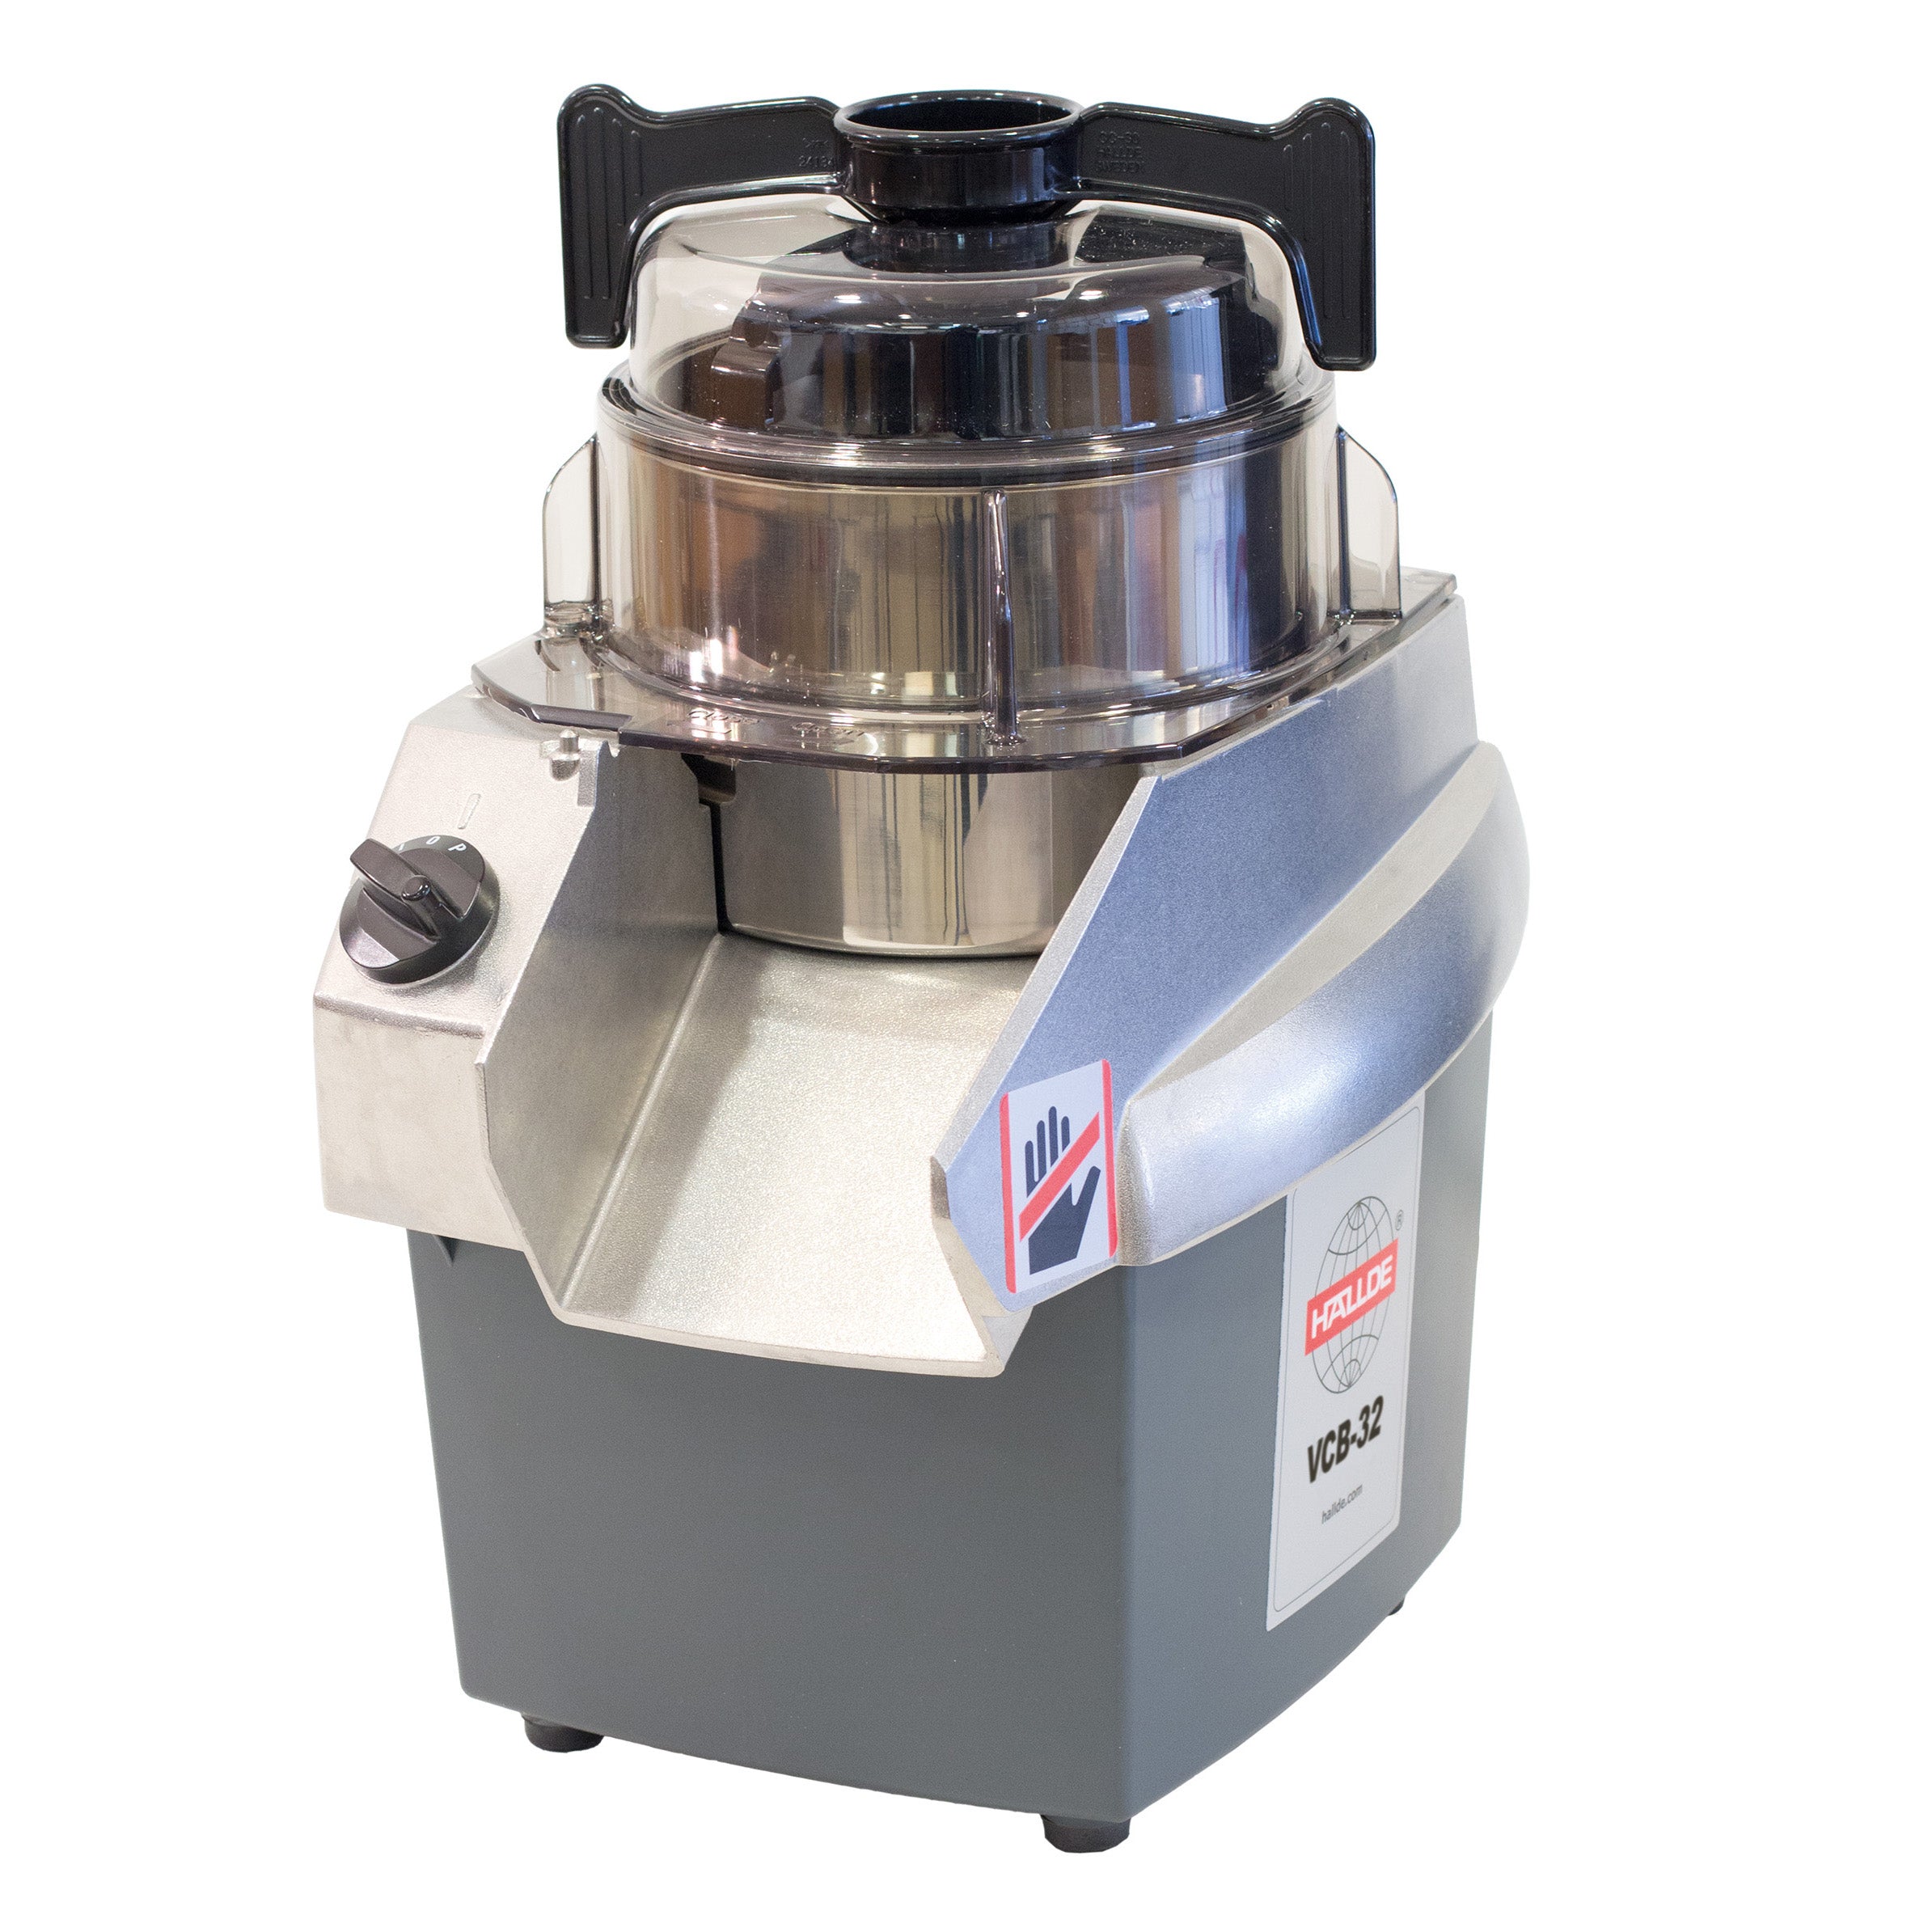 Hallde Vertical Cutter Blender VCB-32 (for Acai Bowls) (SPECIAL OFFER - includes Free Bowl)